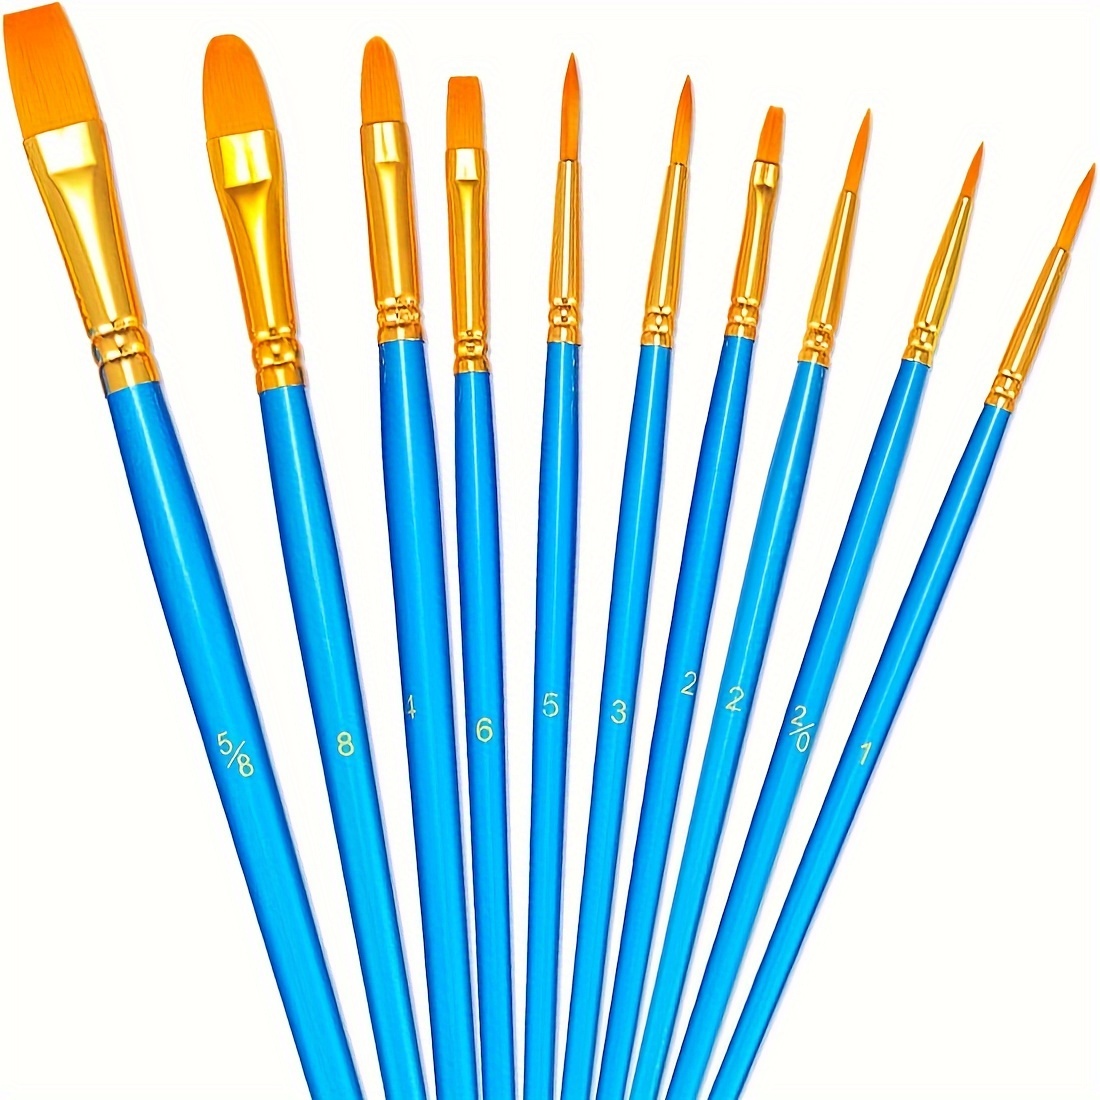 

10-piece Paint Brush Set With Round-pointed Tips - Nylon Bristles For Acrylic, Oil, Watercolor, Face & Nail Art, Miniature Detailing, And Rock Painting